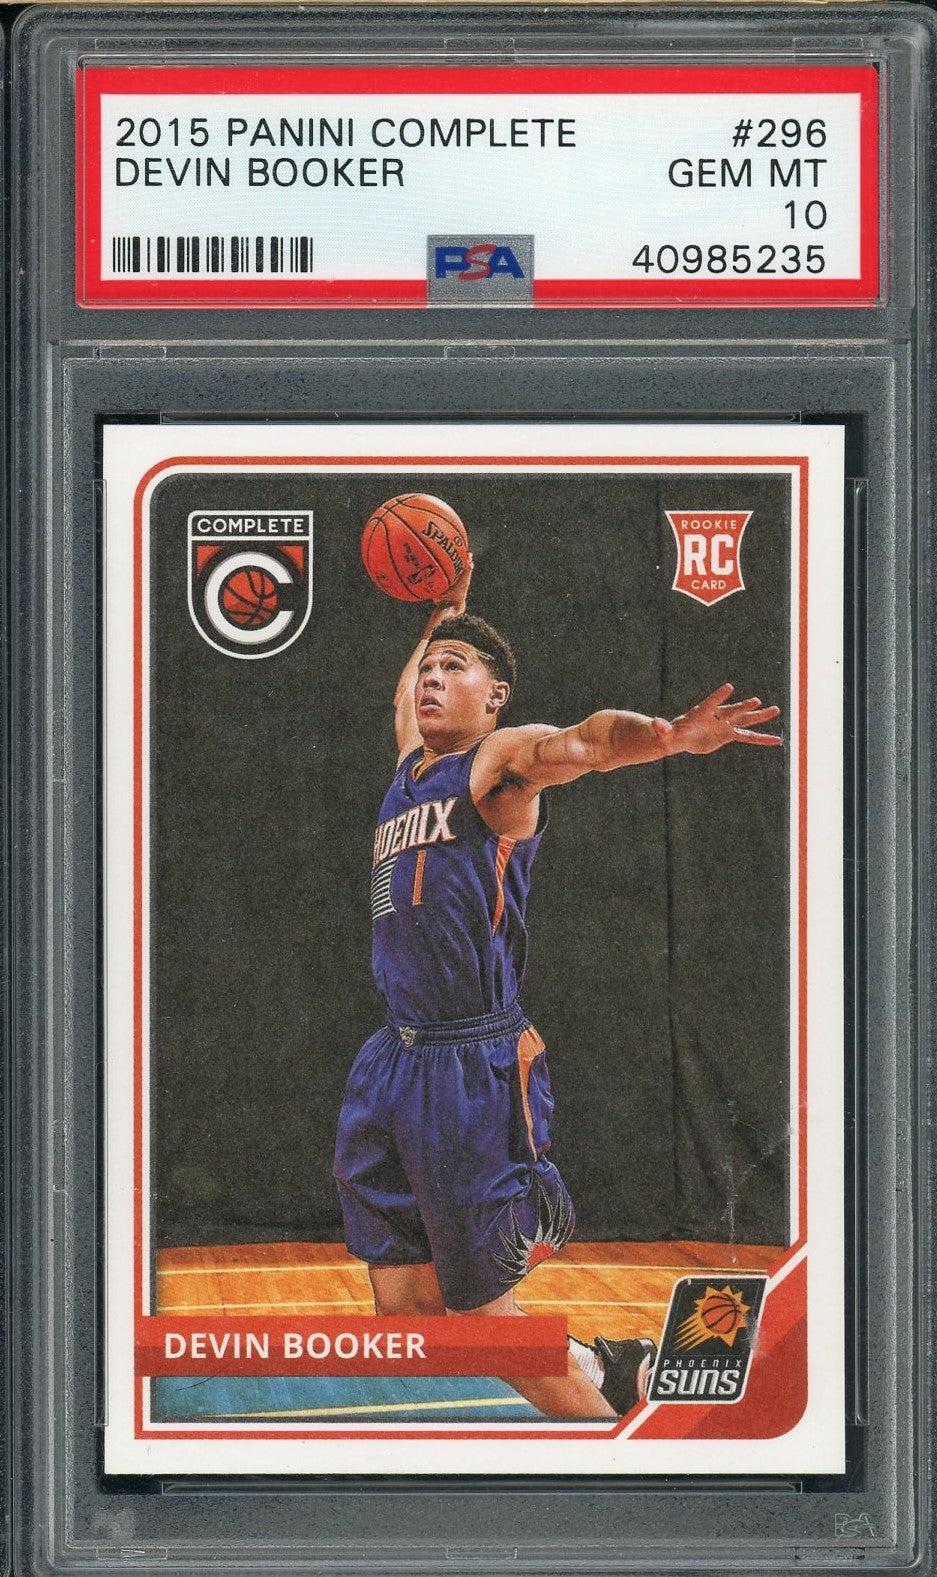 Devin Booker 2015 Panini Complete Basketball Rookie Card #296 Graded PSA 10